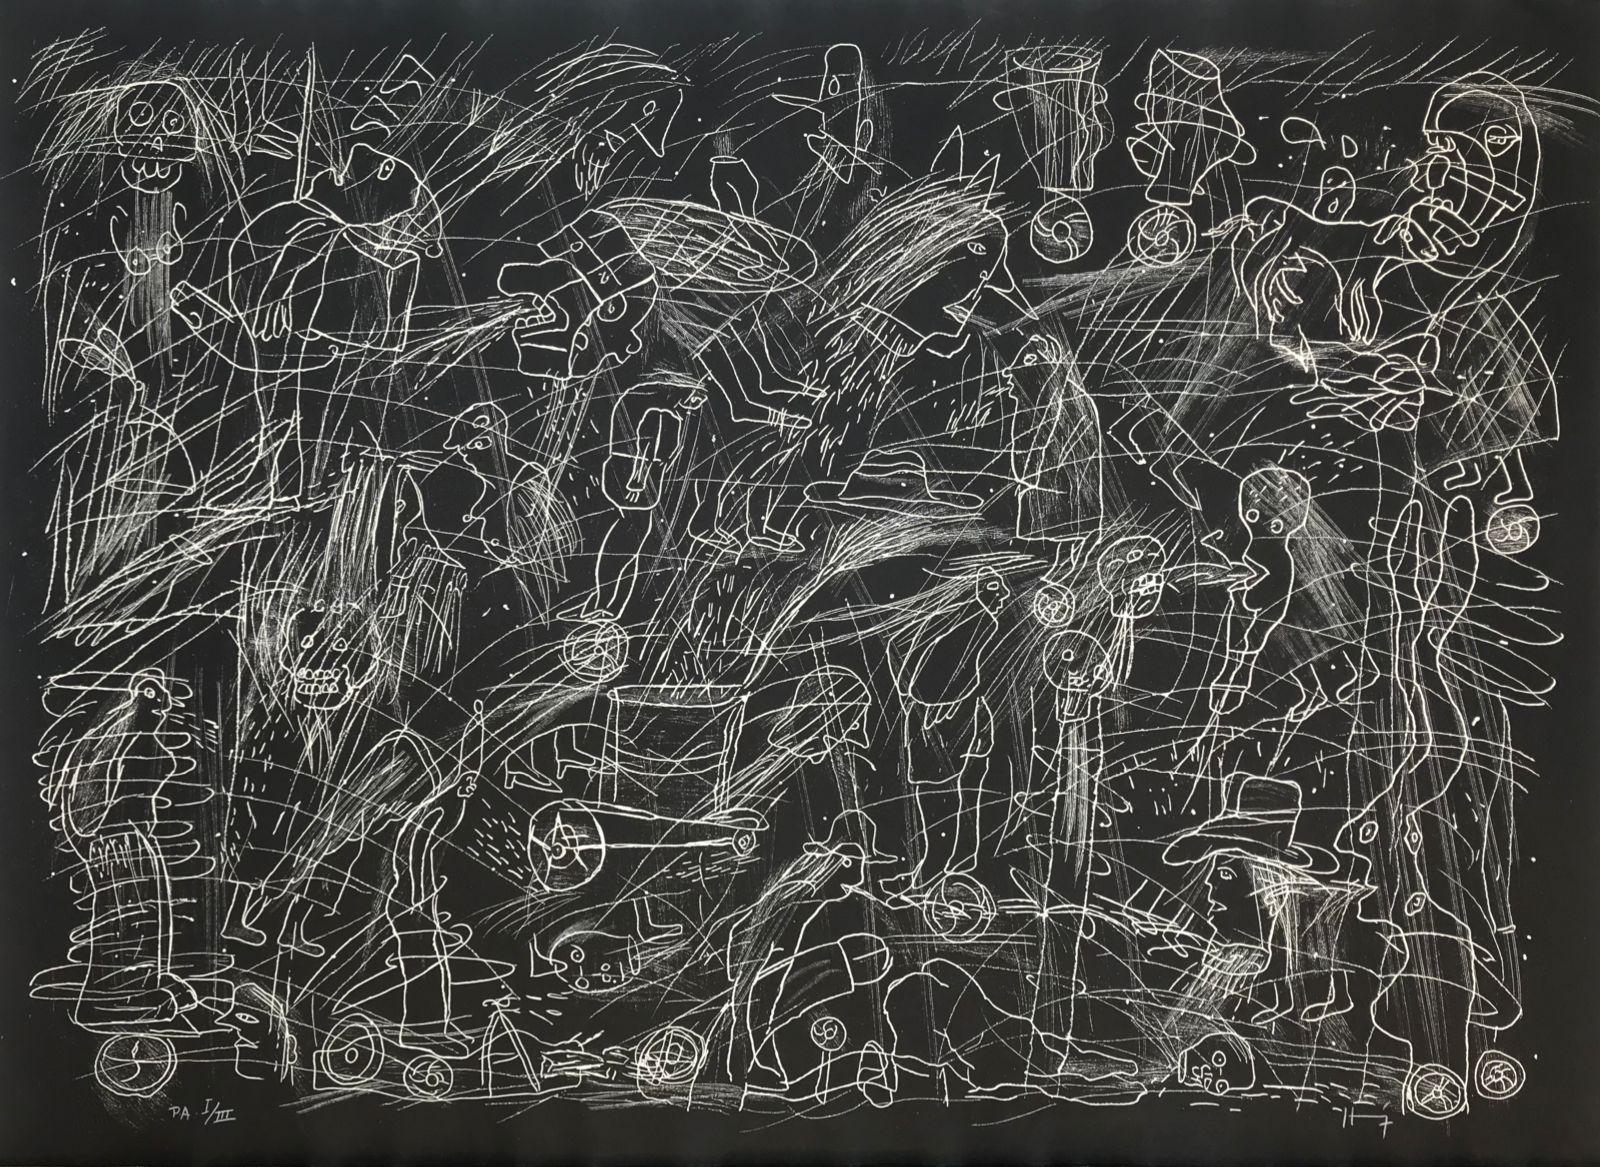 "Sergio Hernández (Mexico, 1957)
'Untitled', 2011
woodcut on paper
30 x 41.4 in. (76 x 105 cm.)
P.A I/III (Proof of Artist)
ID: HER-158-2"
















